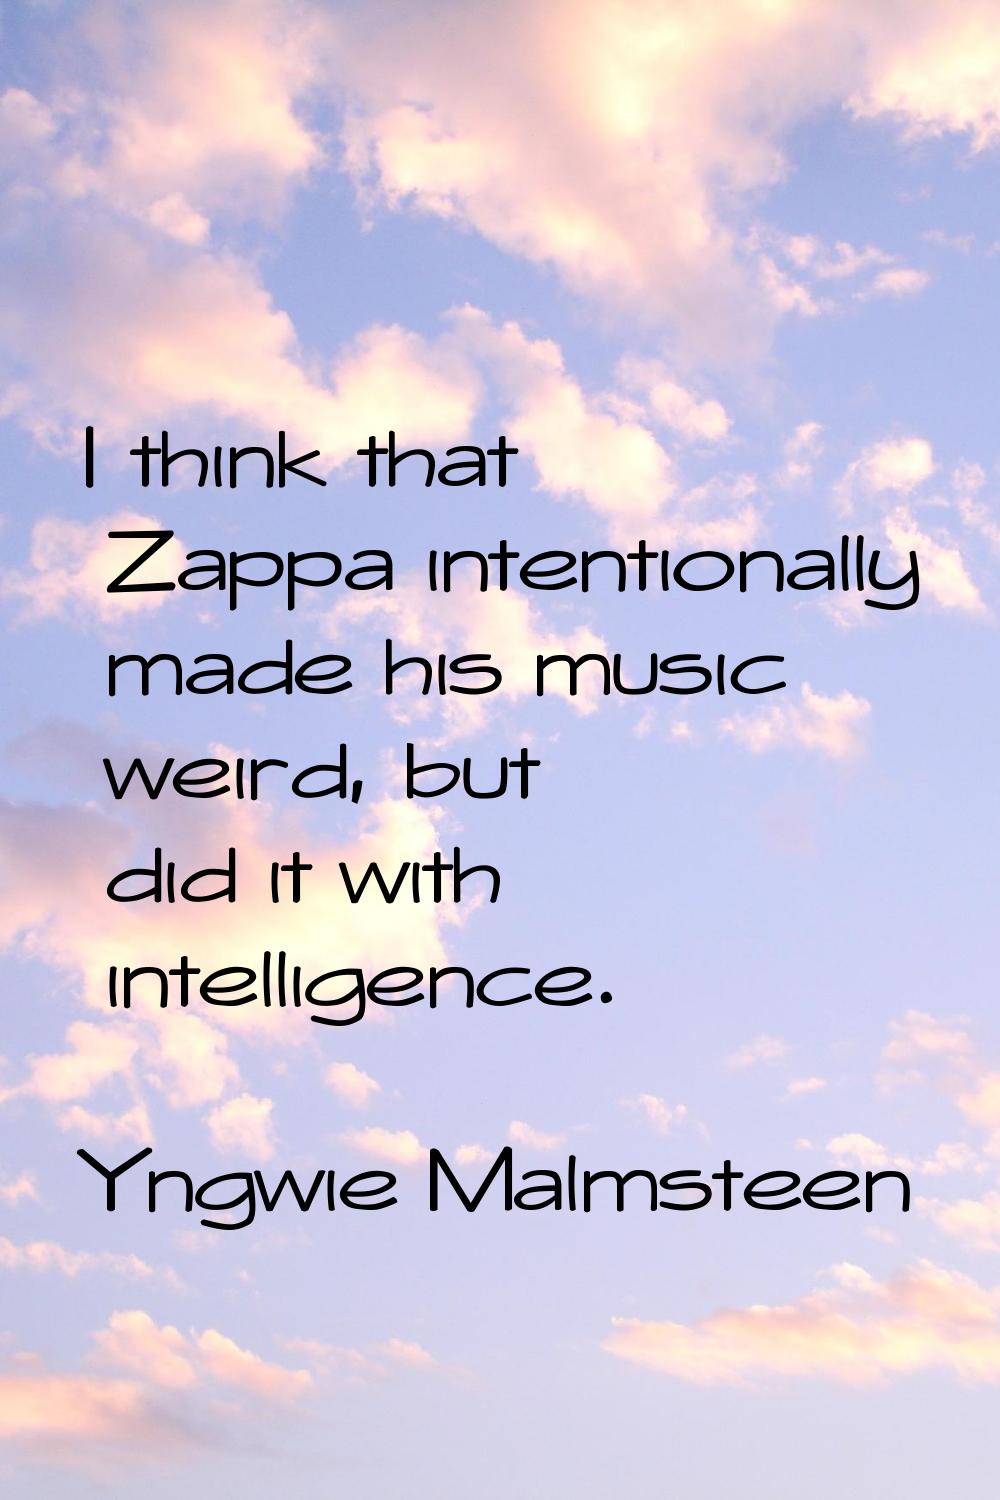 I think that Zappa intentionally made his music weird, but did it with intelligence.